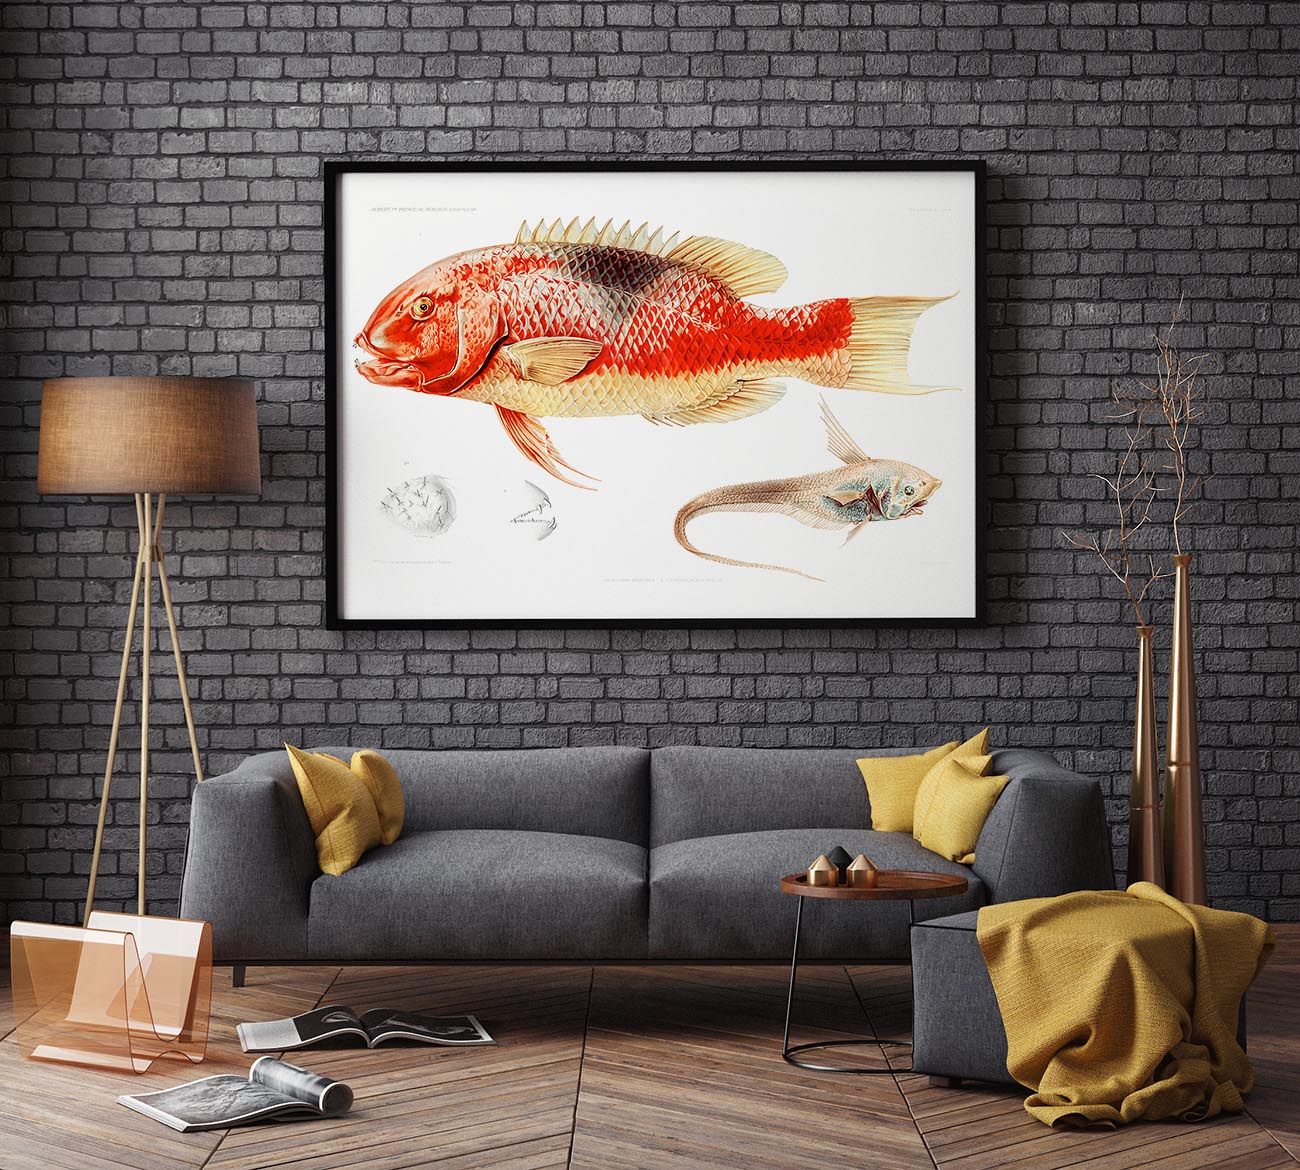 Hogfish and a Ray Finned Fish Poster